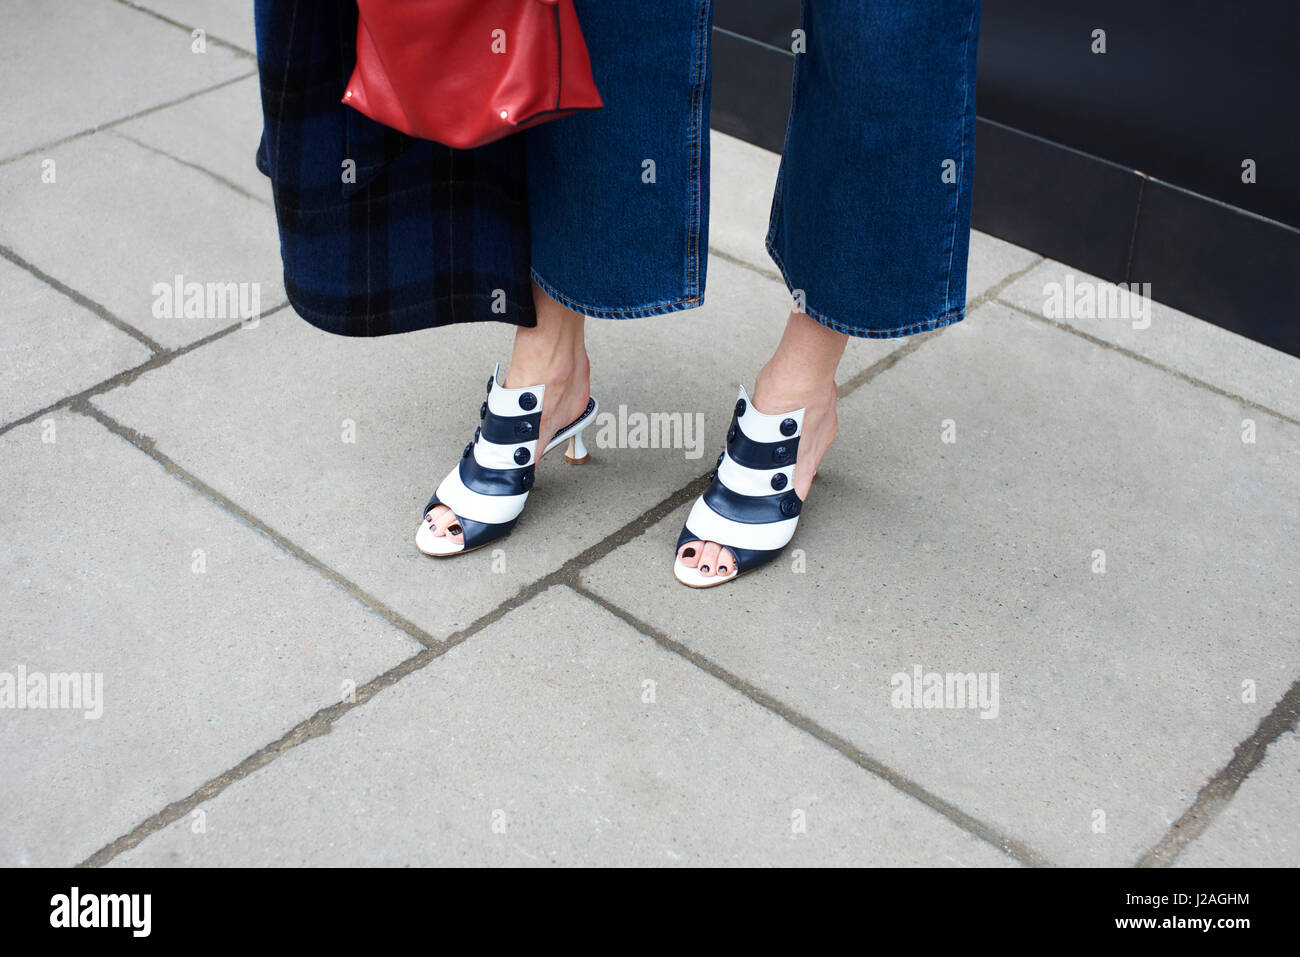 LONDON - FEBRUARY, 2017: Low section of woman wearing three quarter length jeans and  kitten heel striped leather open toe mules standing in the street during London Fashion Week, horizontal high angle close up Stock Photo